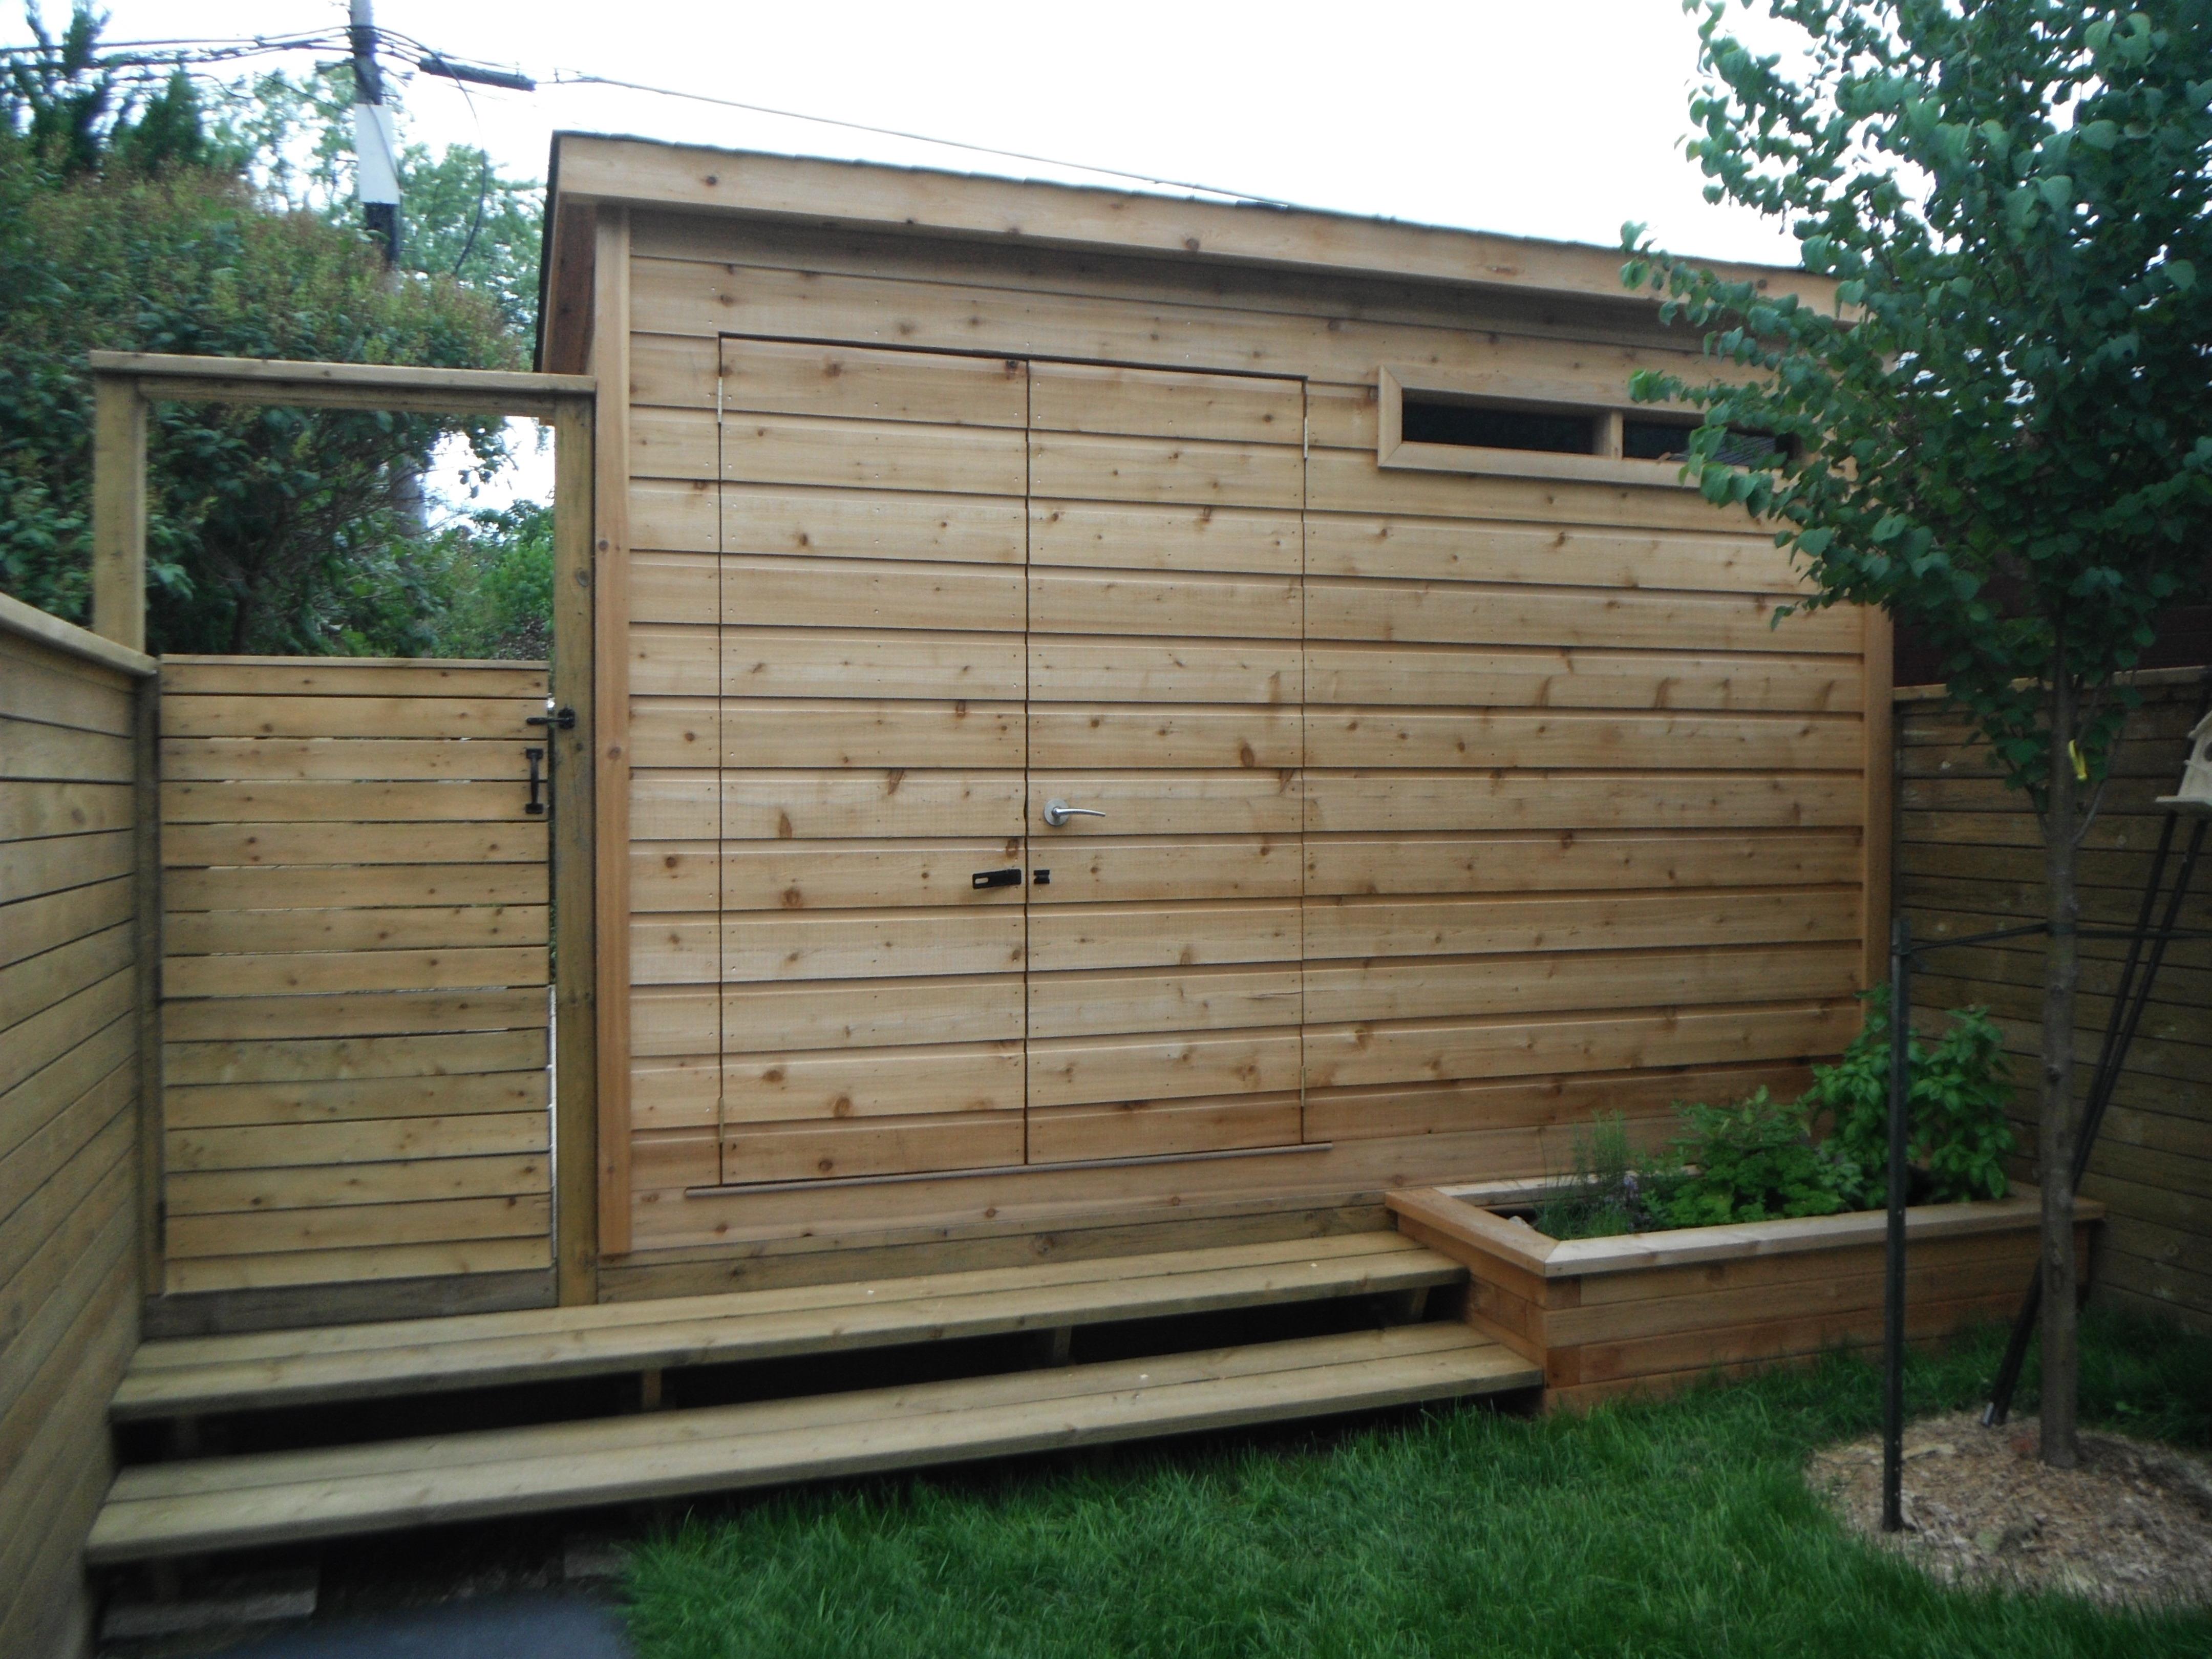 Cedar Sarawak shed 4x12 with concealed double doors in Toronto, Ontario. ID number 133451-1